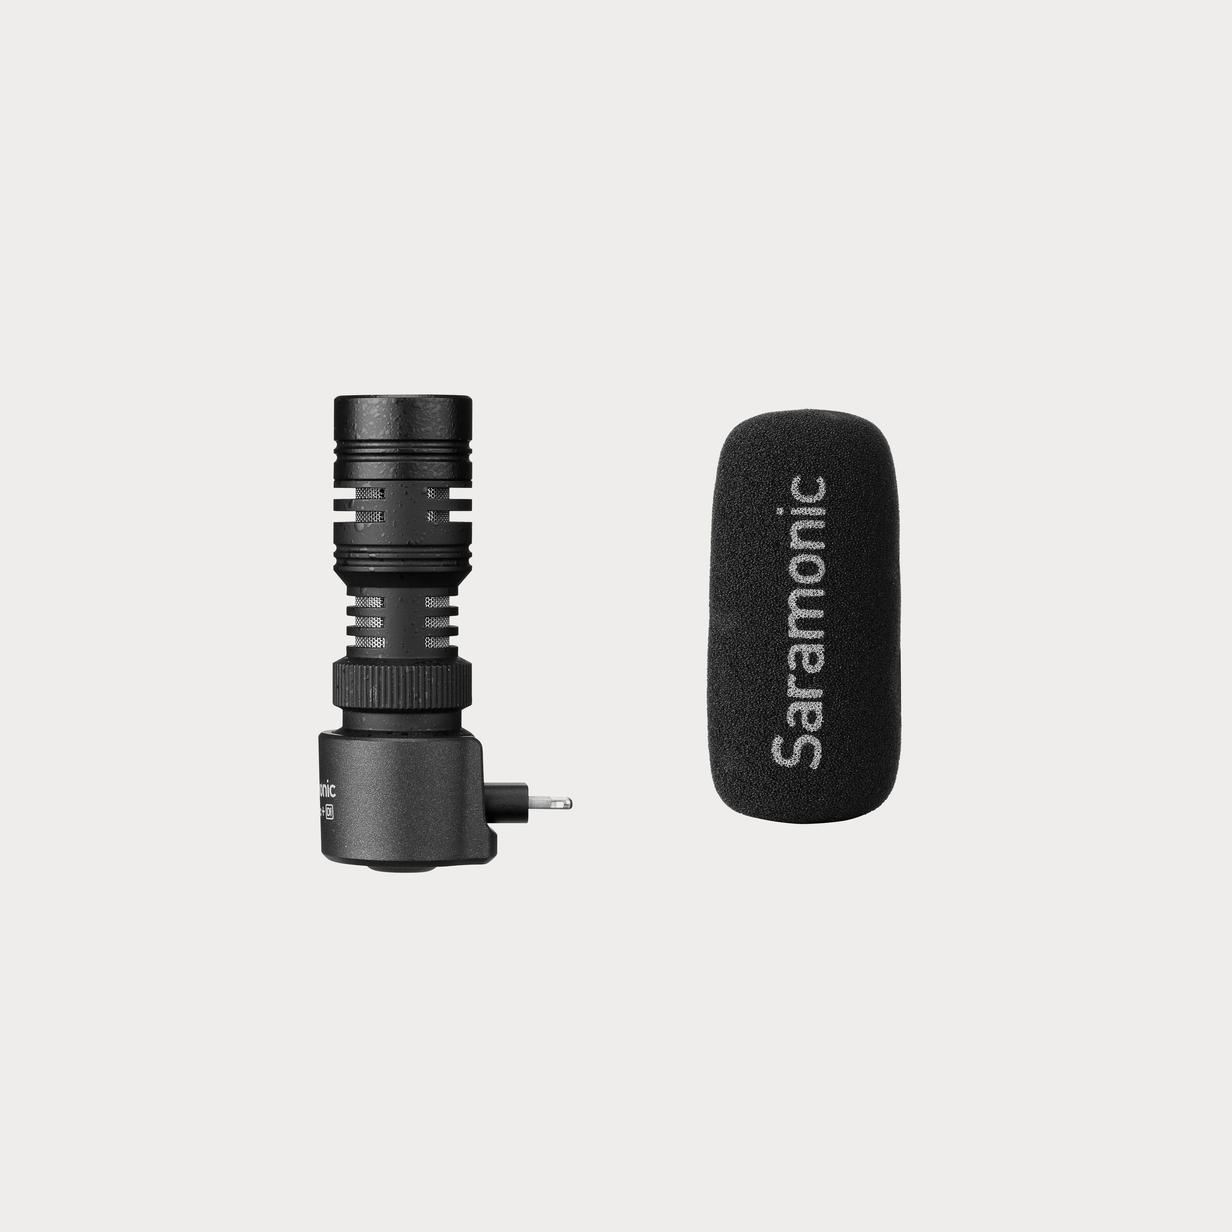 Moment saramonic SMARTMICDI Smart Mic Di Compact Directional Microphone with Lightning Connector for Apple i Phone i Pad 01